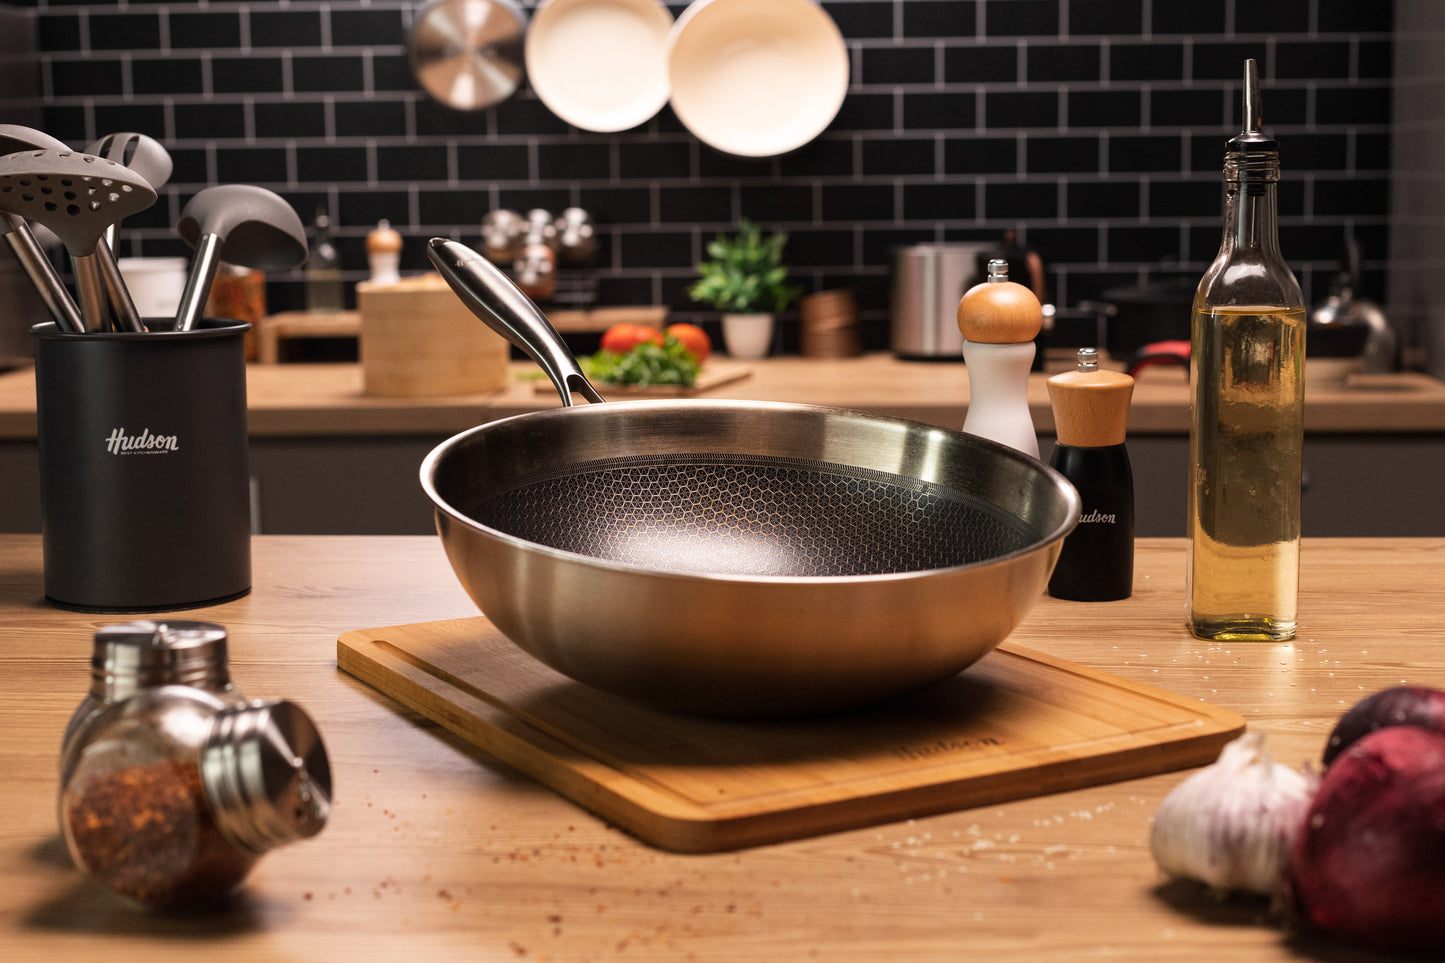 HUDSON Stainless Steel Frypan with Ultra-Durable Non-Stick Coating